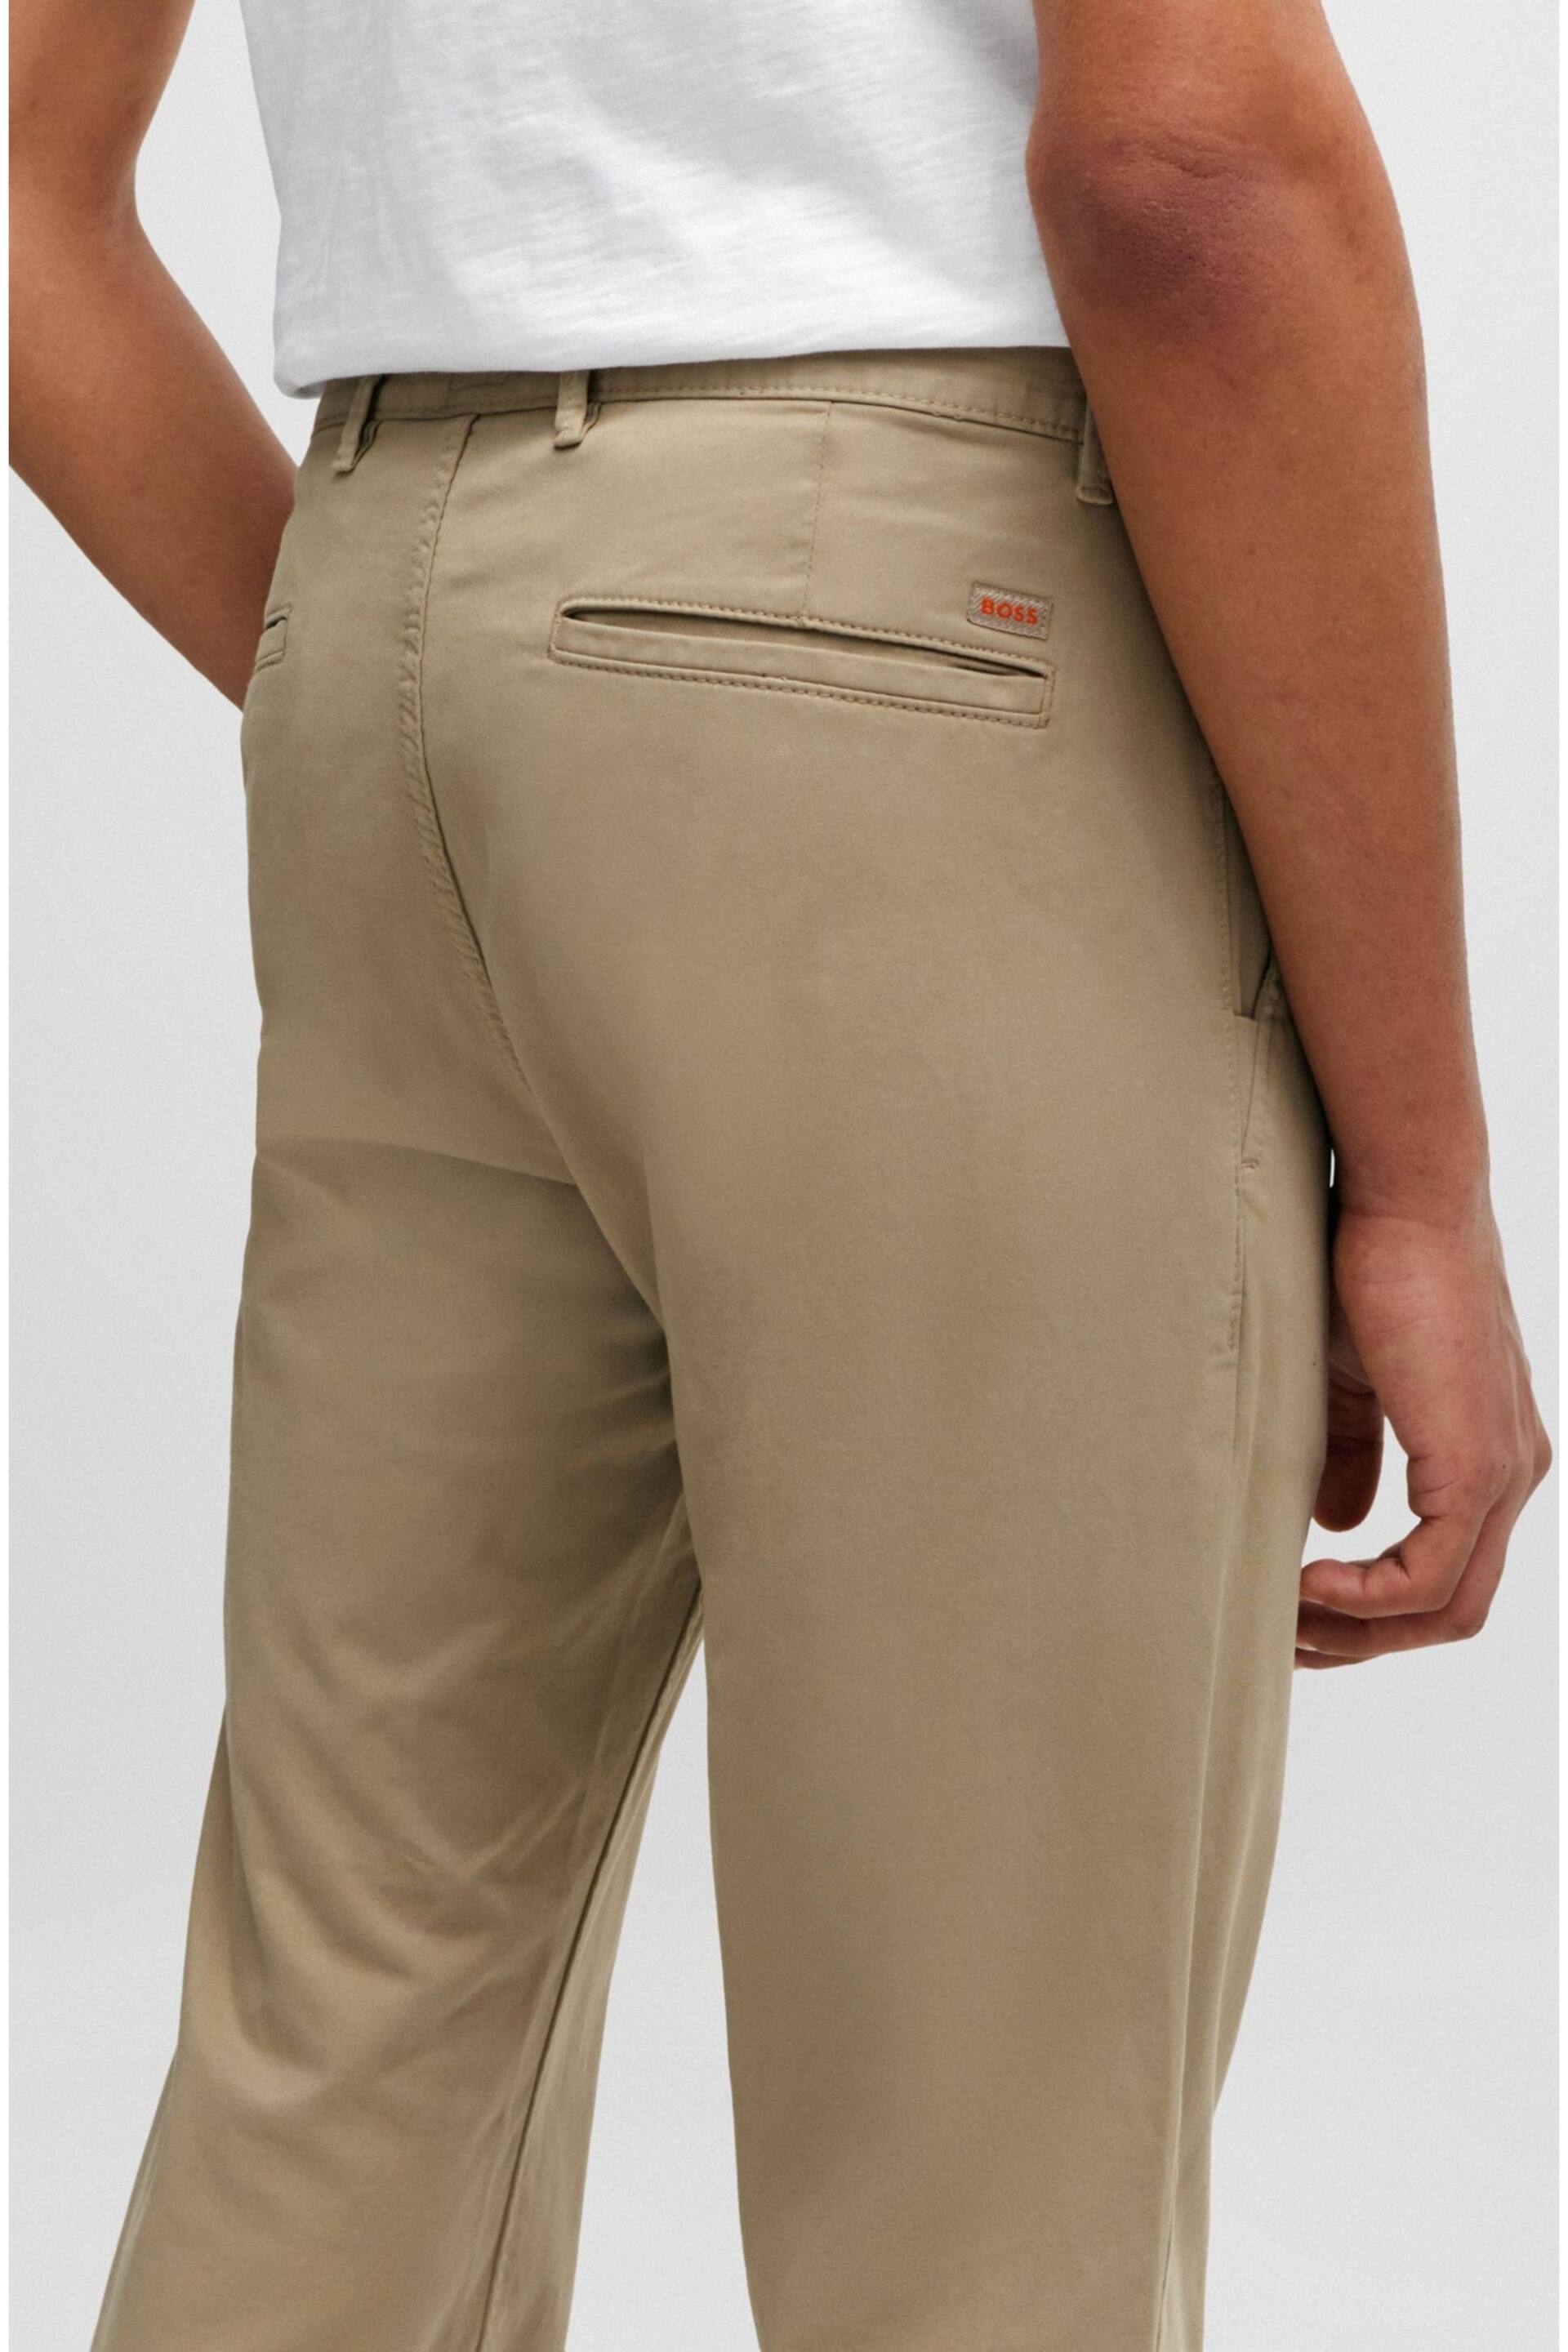 BOSS Natural Slim Fit Stretch Cotton Trousers - Image 4 of 5